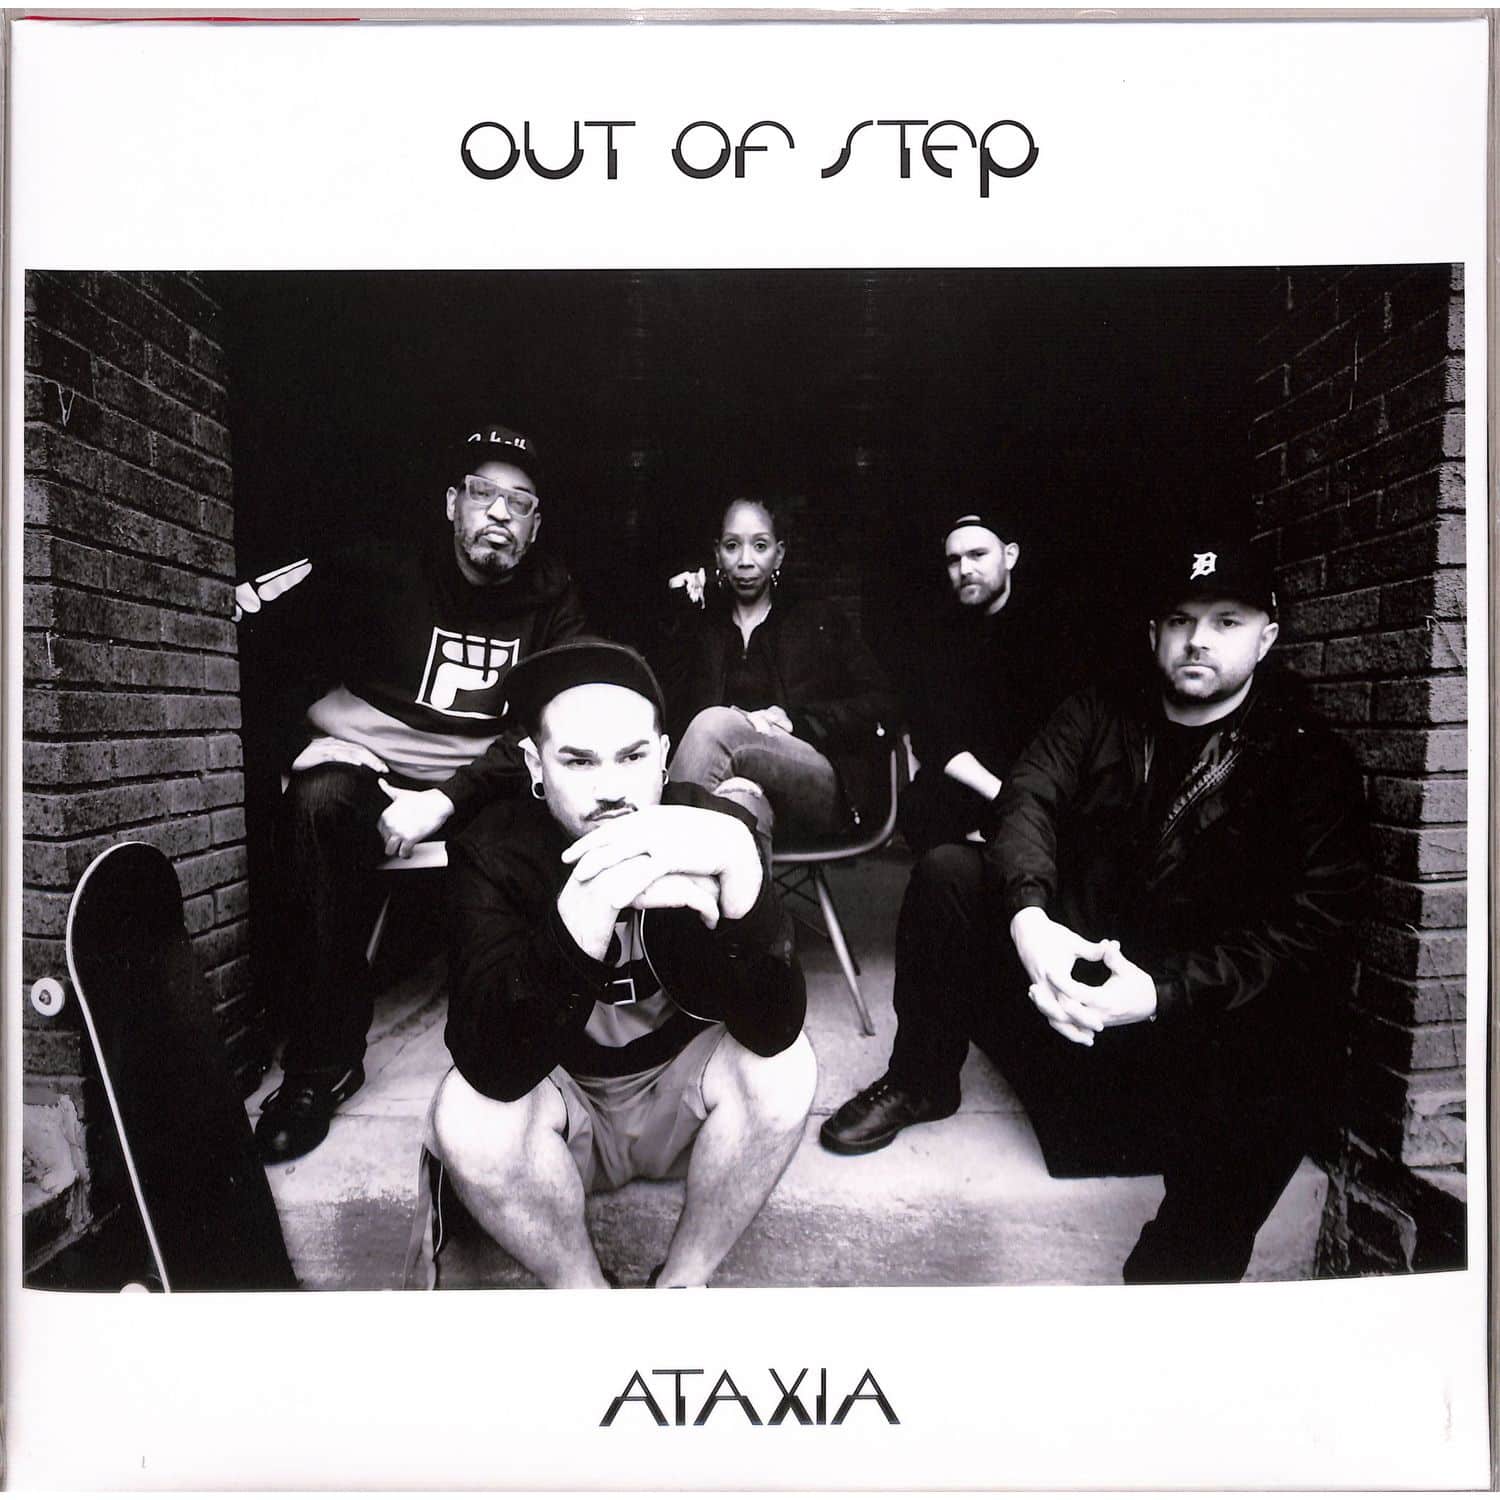 Ataxia - OUT OF STEP 